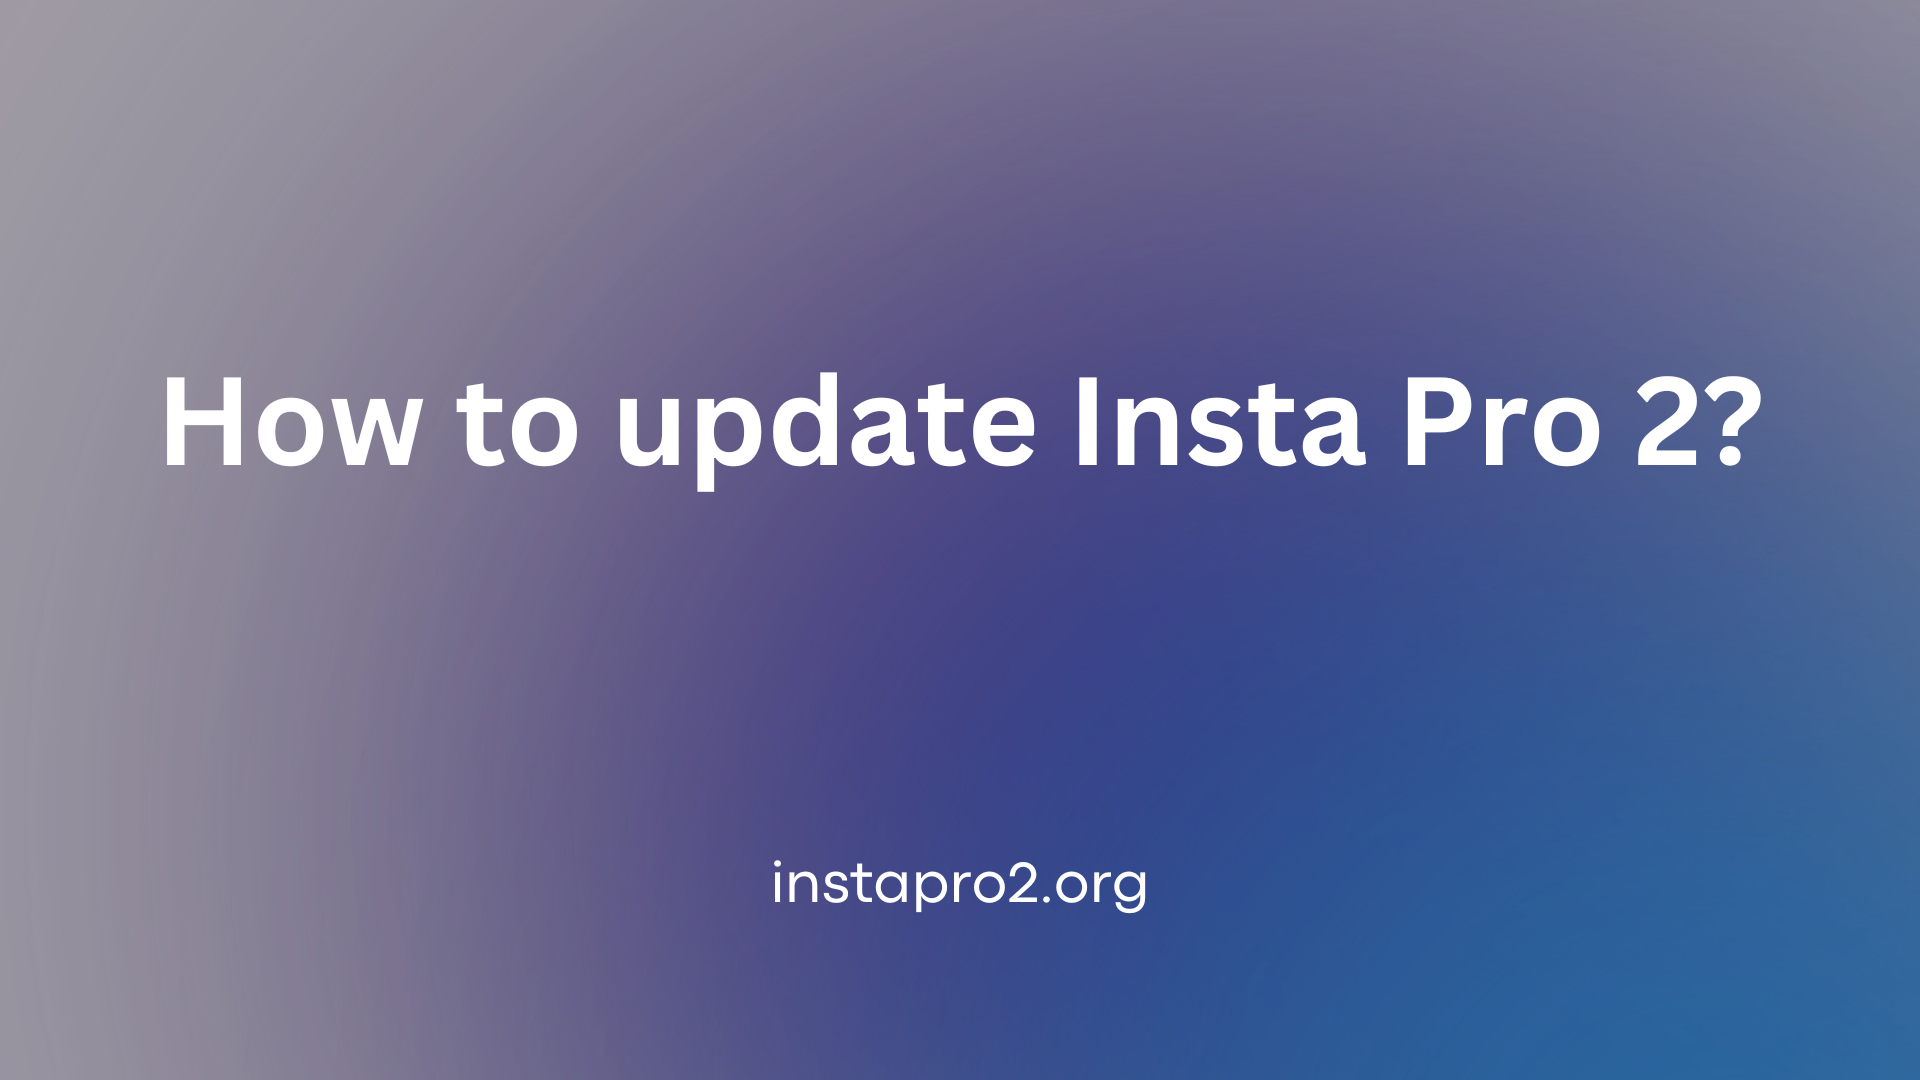 How to update Insta Pro 2?